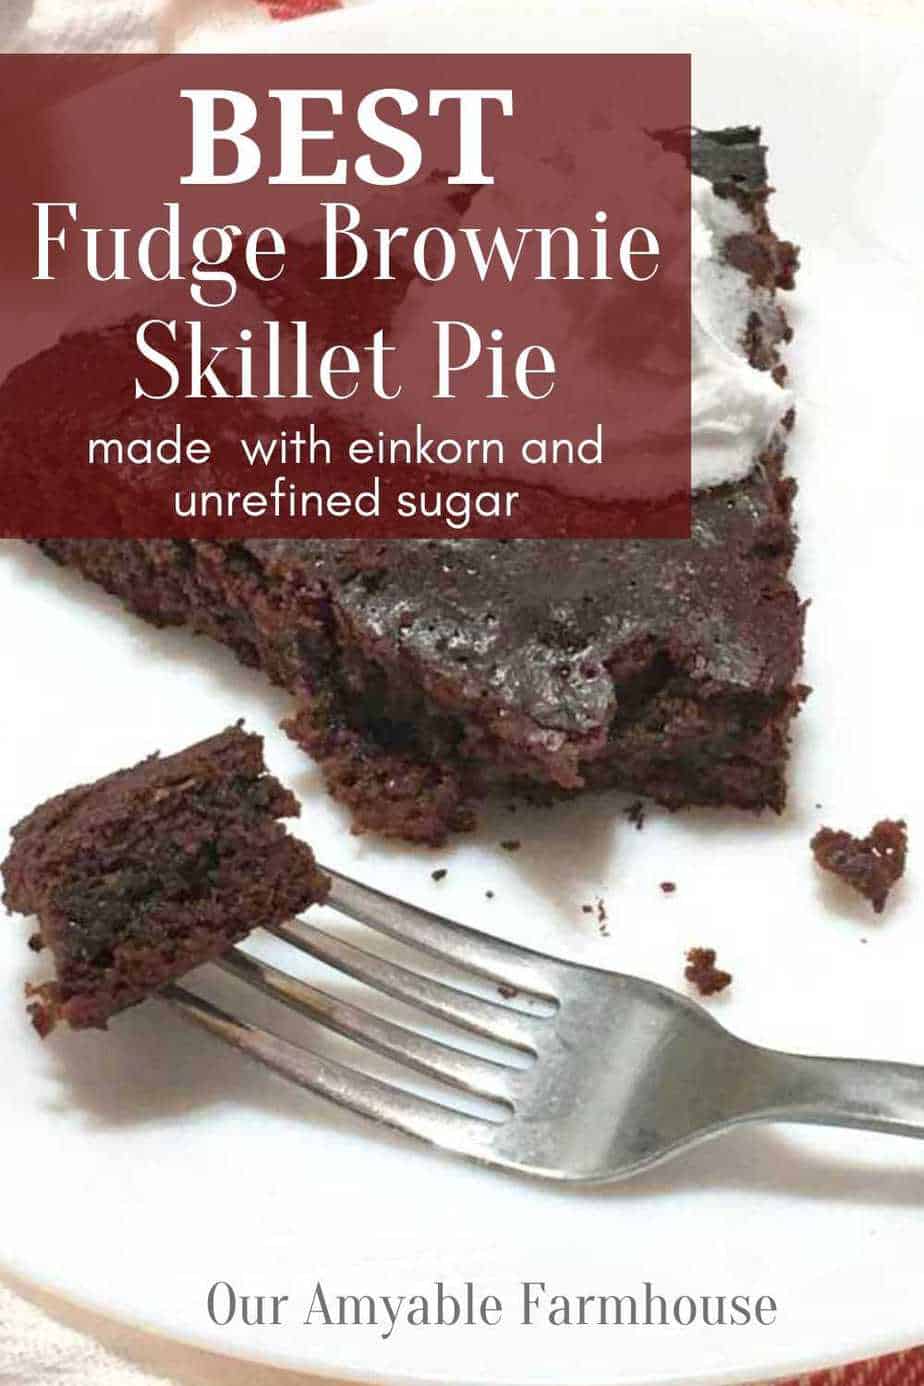 BEST Fudge Brownie Skillet Pie with traditional whole foods like einkorn and sucanat sugar. Our Amyable Farmhouse.